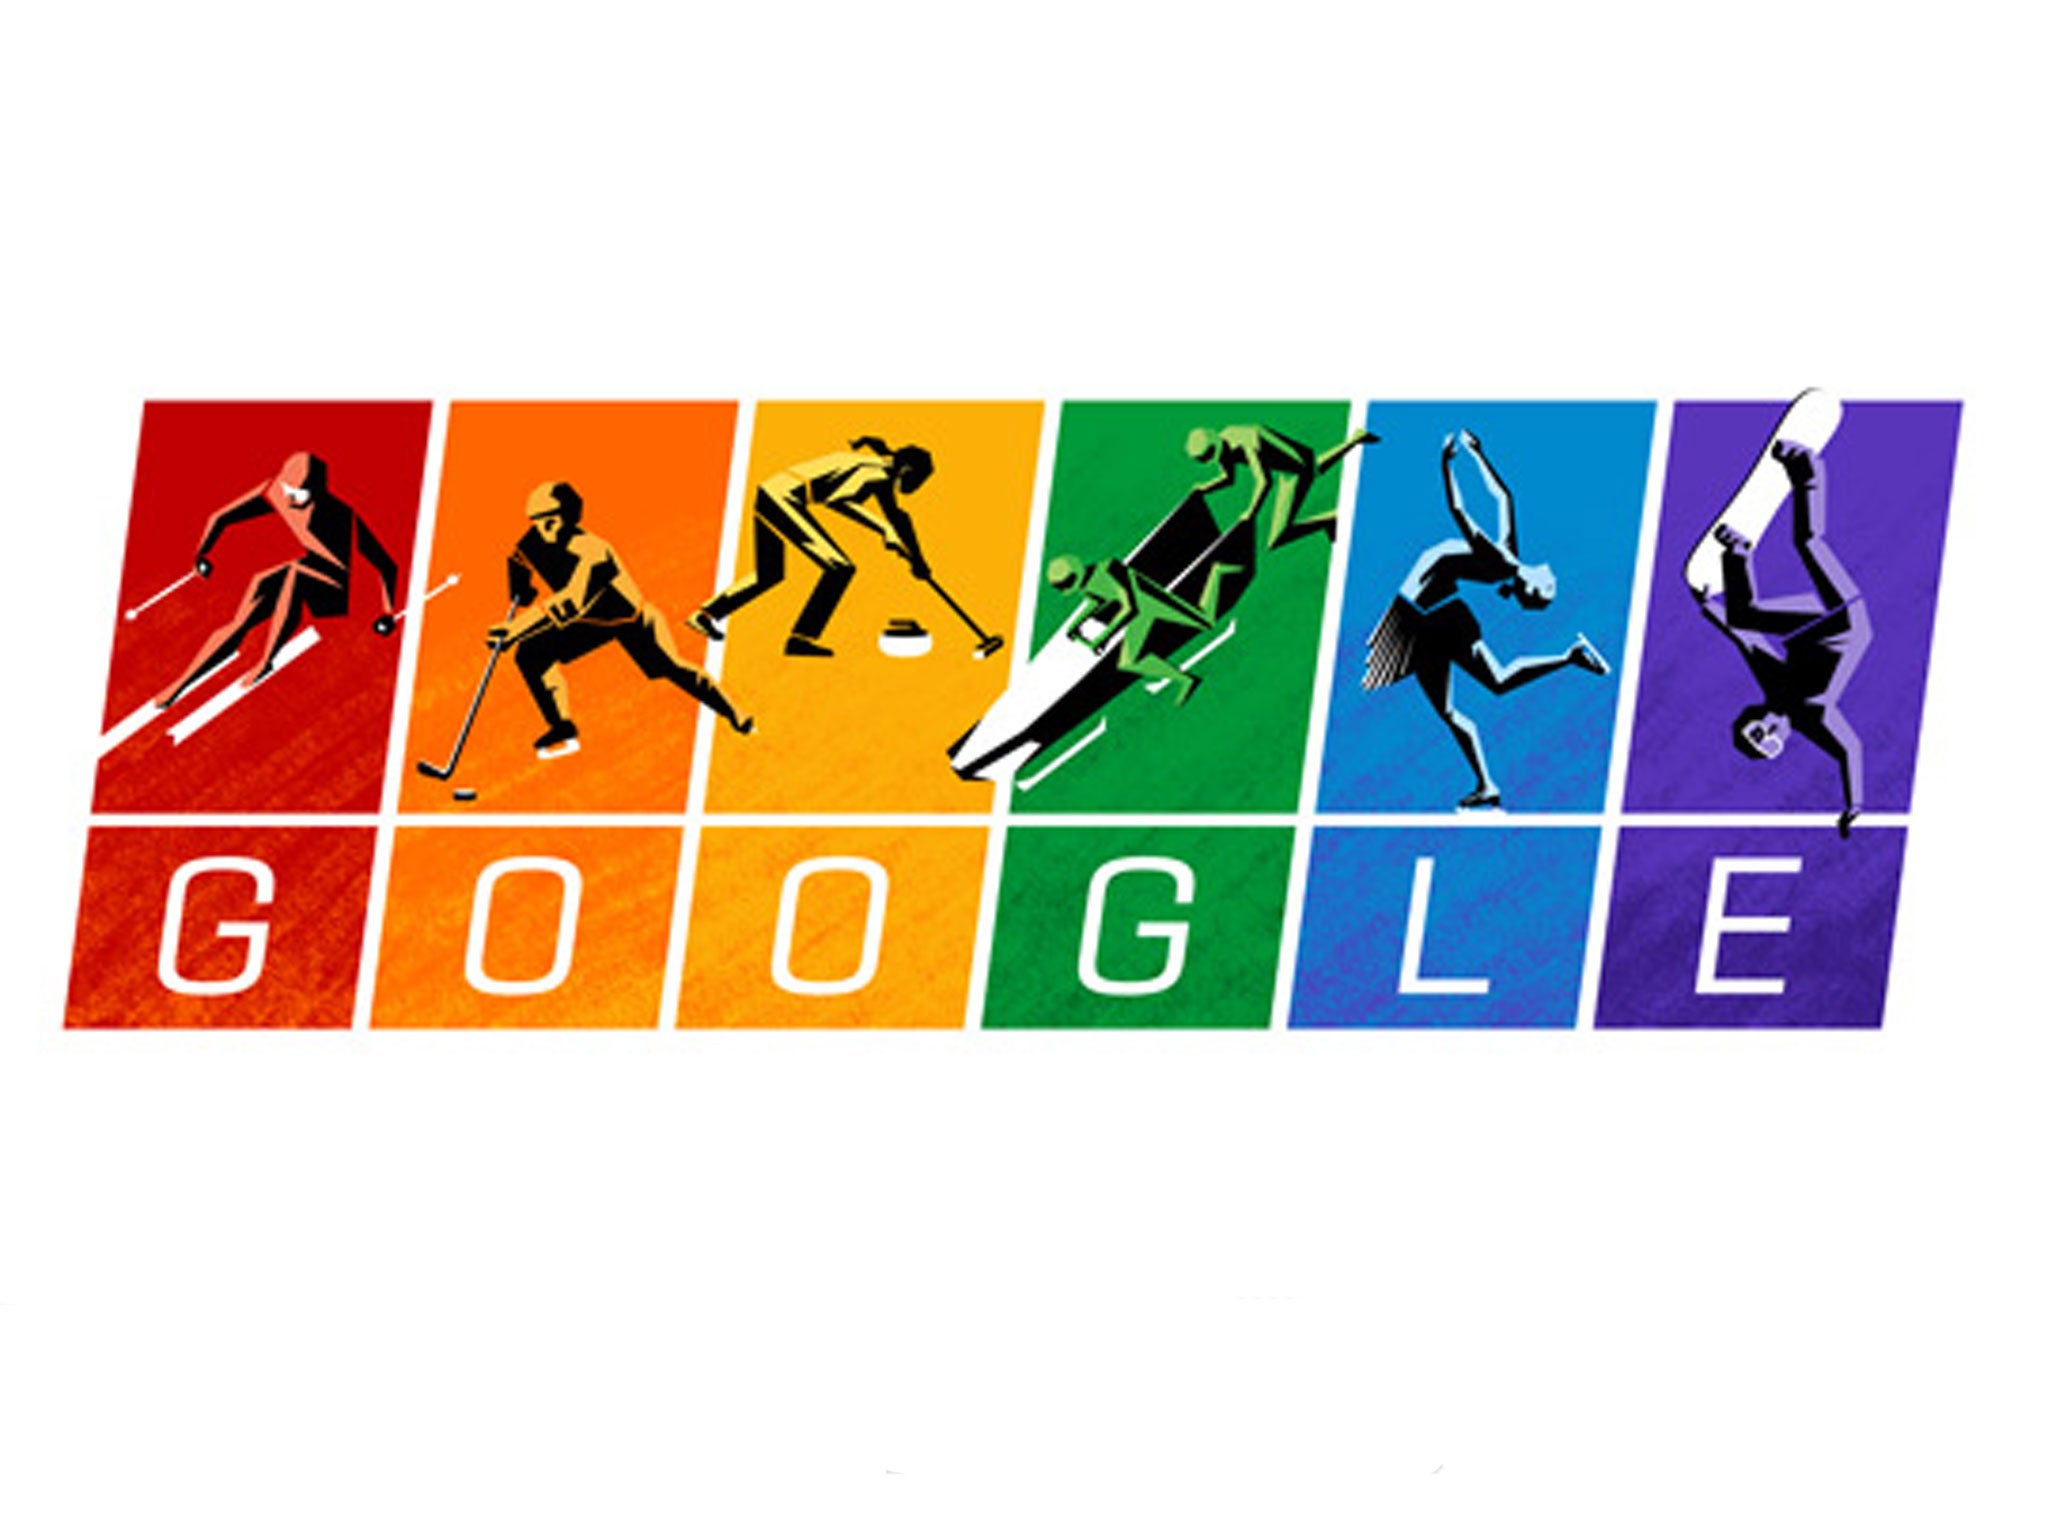 Today's Google Doodle marks the start of the 2014 Sochi Winter Olympics